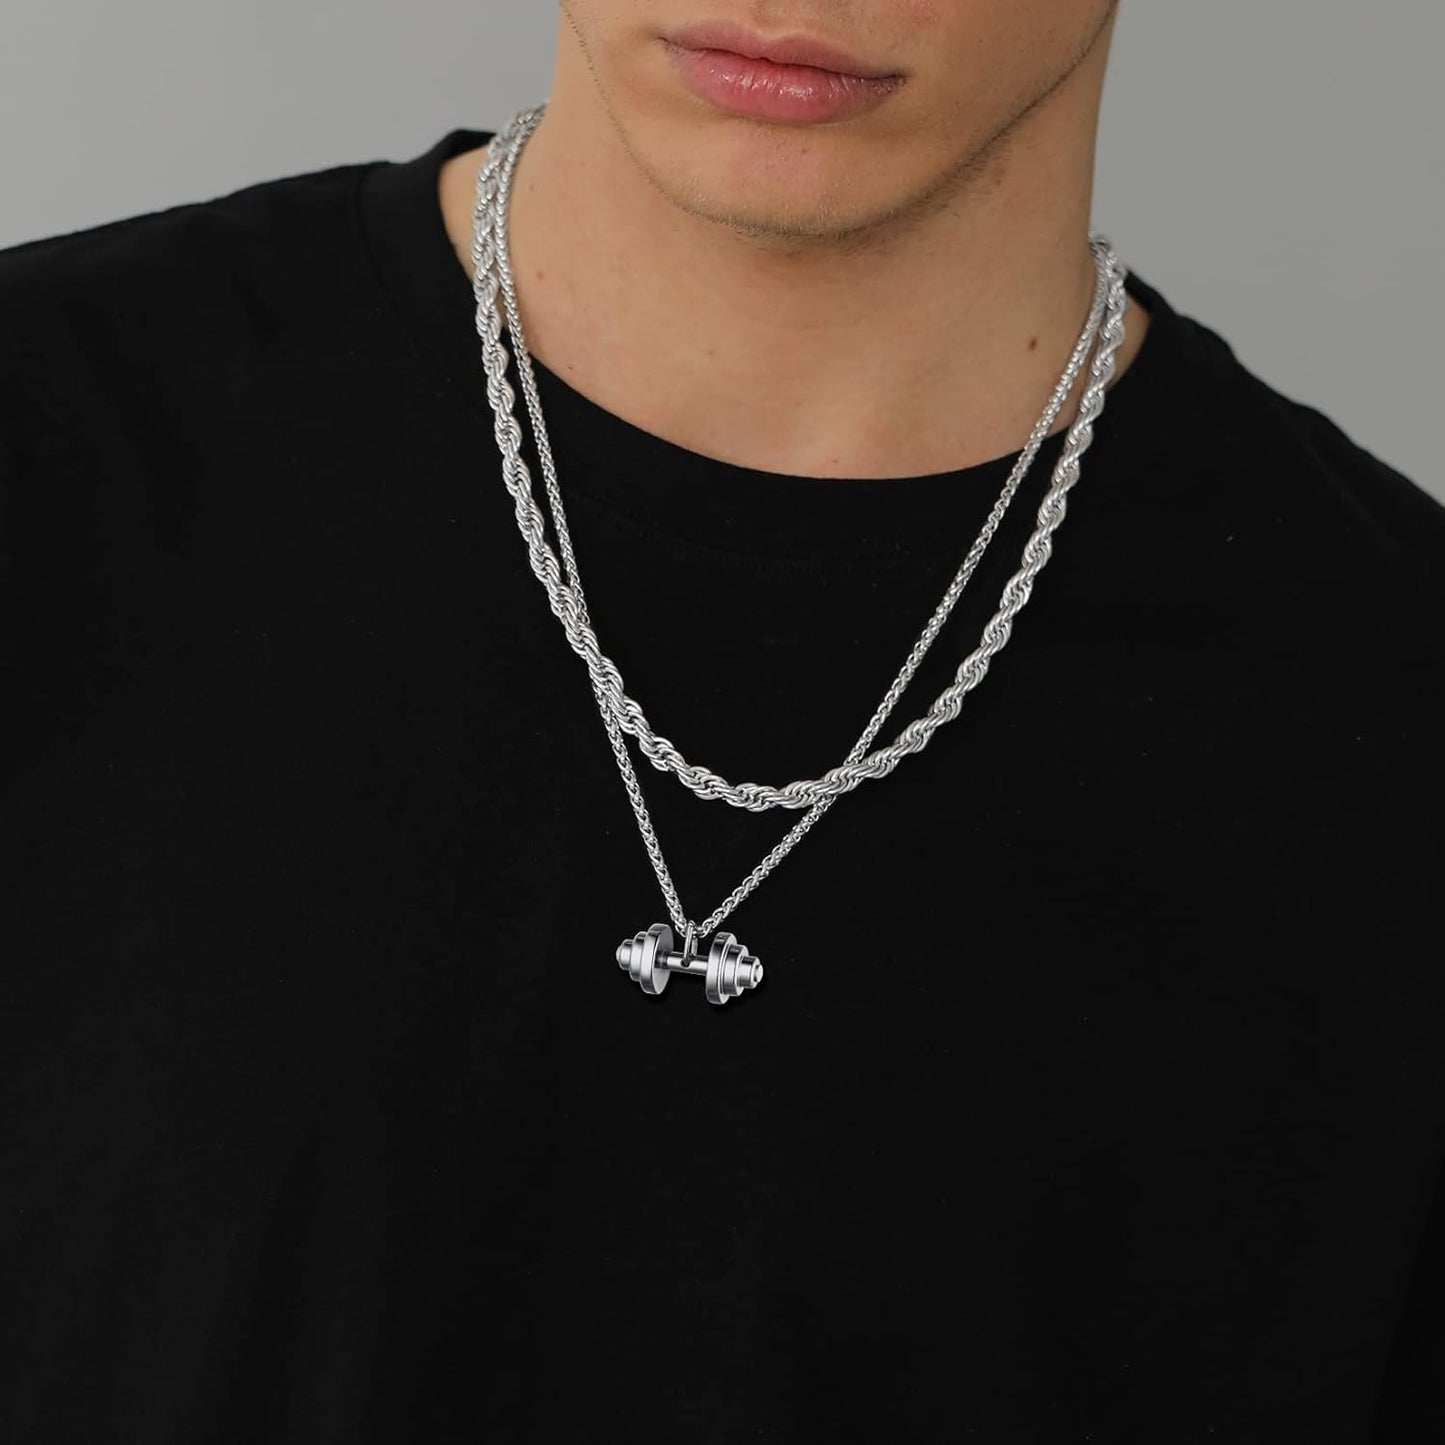 U7 Dumbbell Necklace - Stainless Steel Masculine Statement